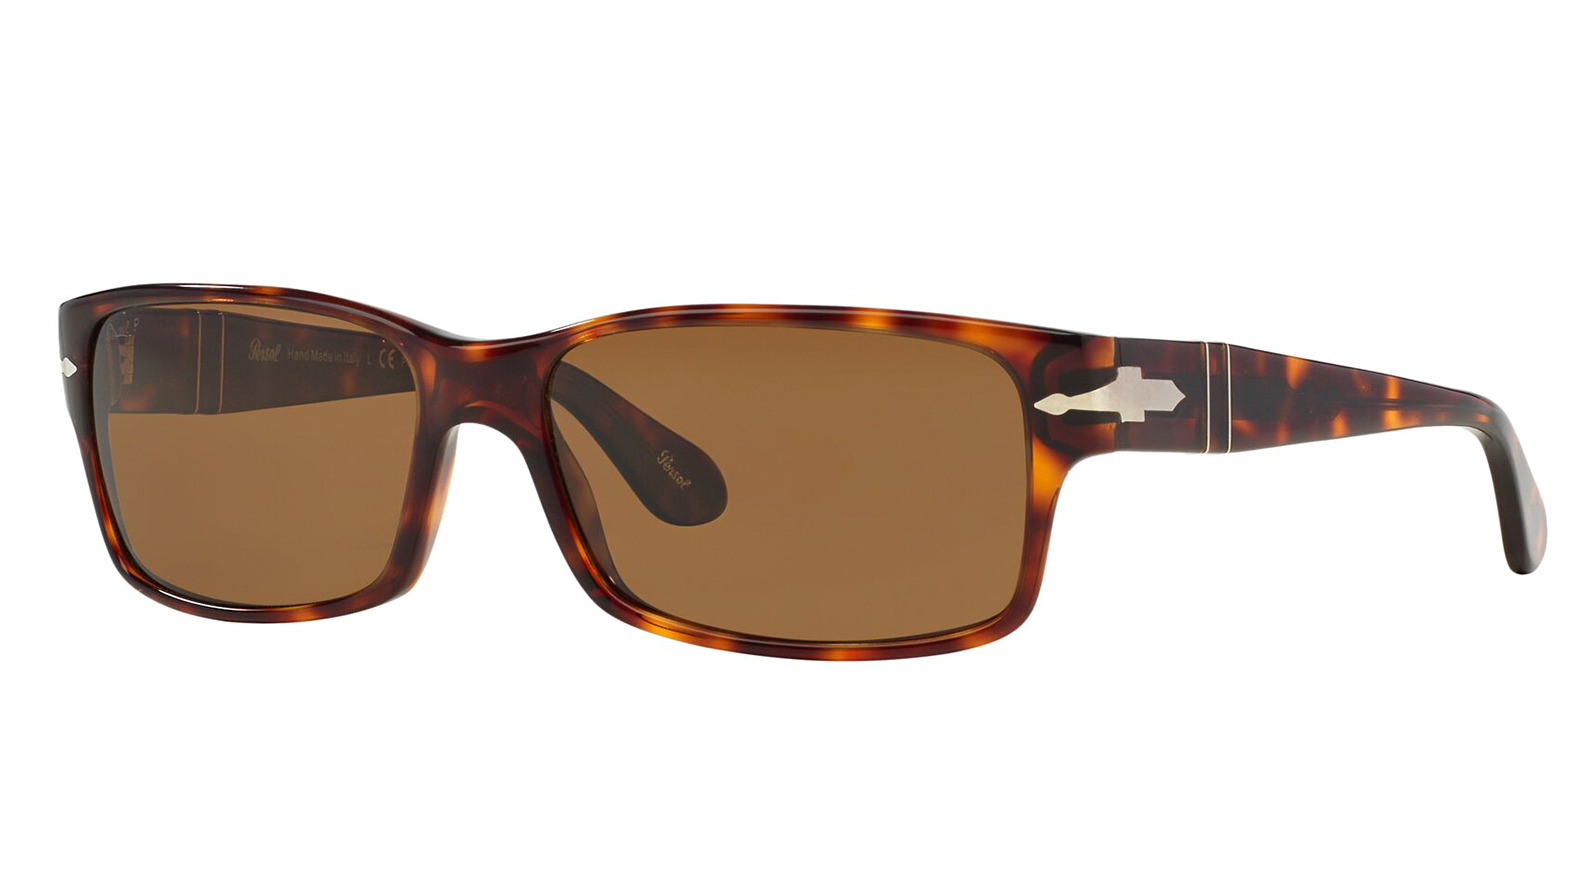 Persol 2803S 24/57